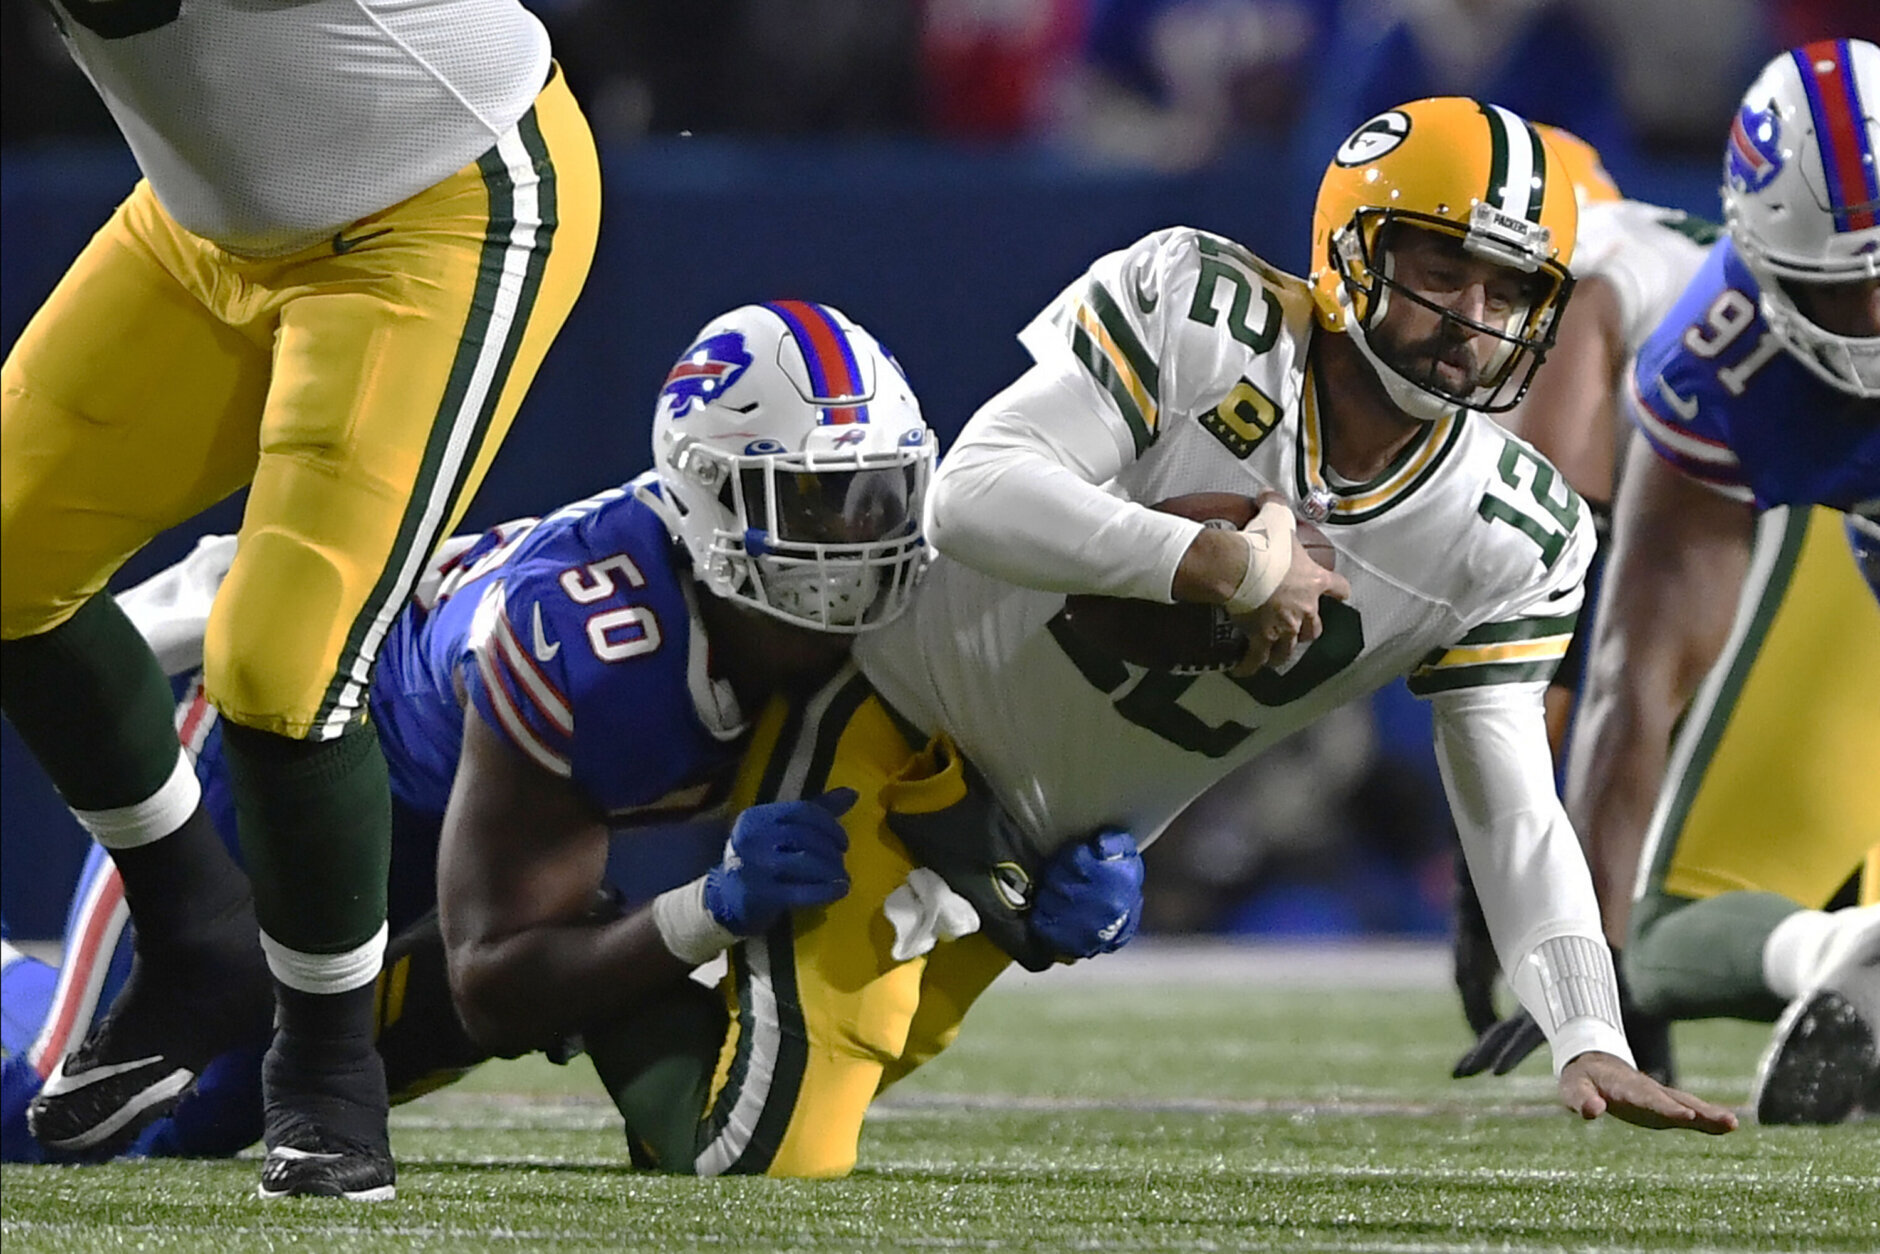 <p><b><i>Packers 17</i></b><br />
<b><i>Bills 27</i></b></p>
<p>If you thought <a href="https://profootballtalk.nbcsports.com/2022/10/26/in-calling-out-teammates-aaron-rodgers-necessarily-calls-out-his-coach/" target="_blank" rel="noopener" data-saferedirecturl="https://www.google.com/url?q=https://profootballtalk.nbcsports.com/2022/10/26/in-calling-out-teammates-aaron-rodgers-necessarily-calls-out-his-coach/&amp;source=gmail&amp;ust=1667274741054000&amp;usg=AOvVaw174g4Zrlbk8wTqz-VPxNXR">Aaron Rodgers was calling out the Packers before</a>, just wait till his next therapy session with Pat McAfee.</p>
<p>Buffalo should feel good about this because they played a C-level game and still beat a future Hall of Fame QB by double digits. The Bills are scary good.</p>
